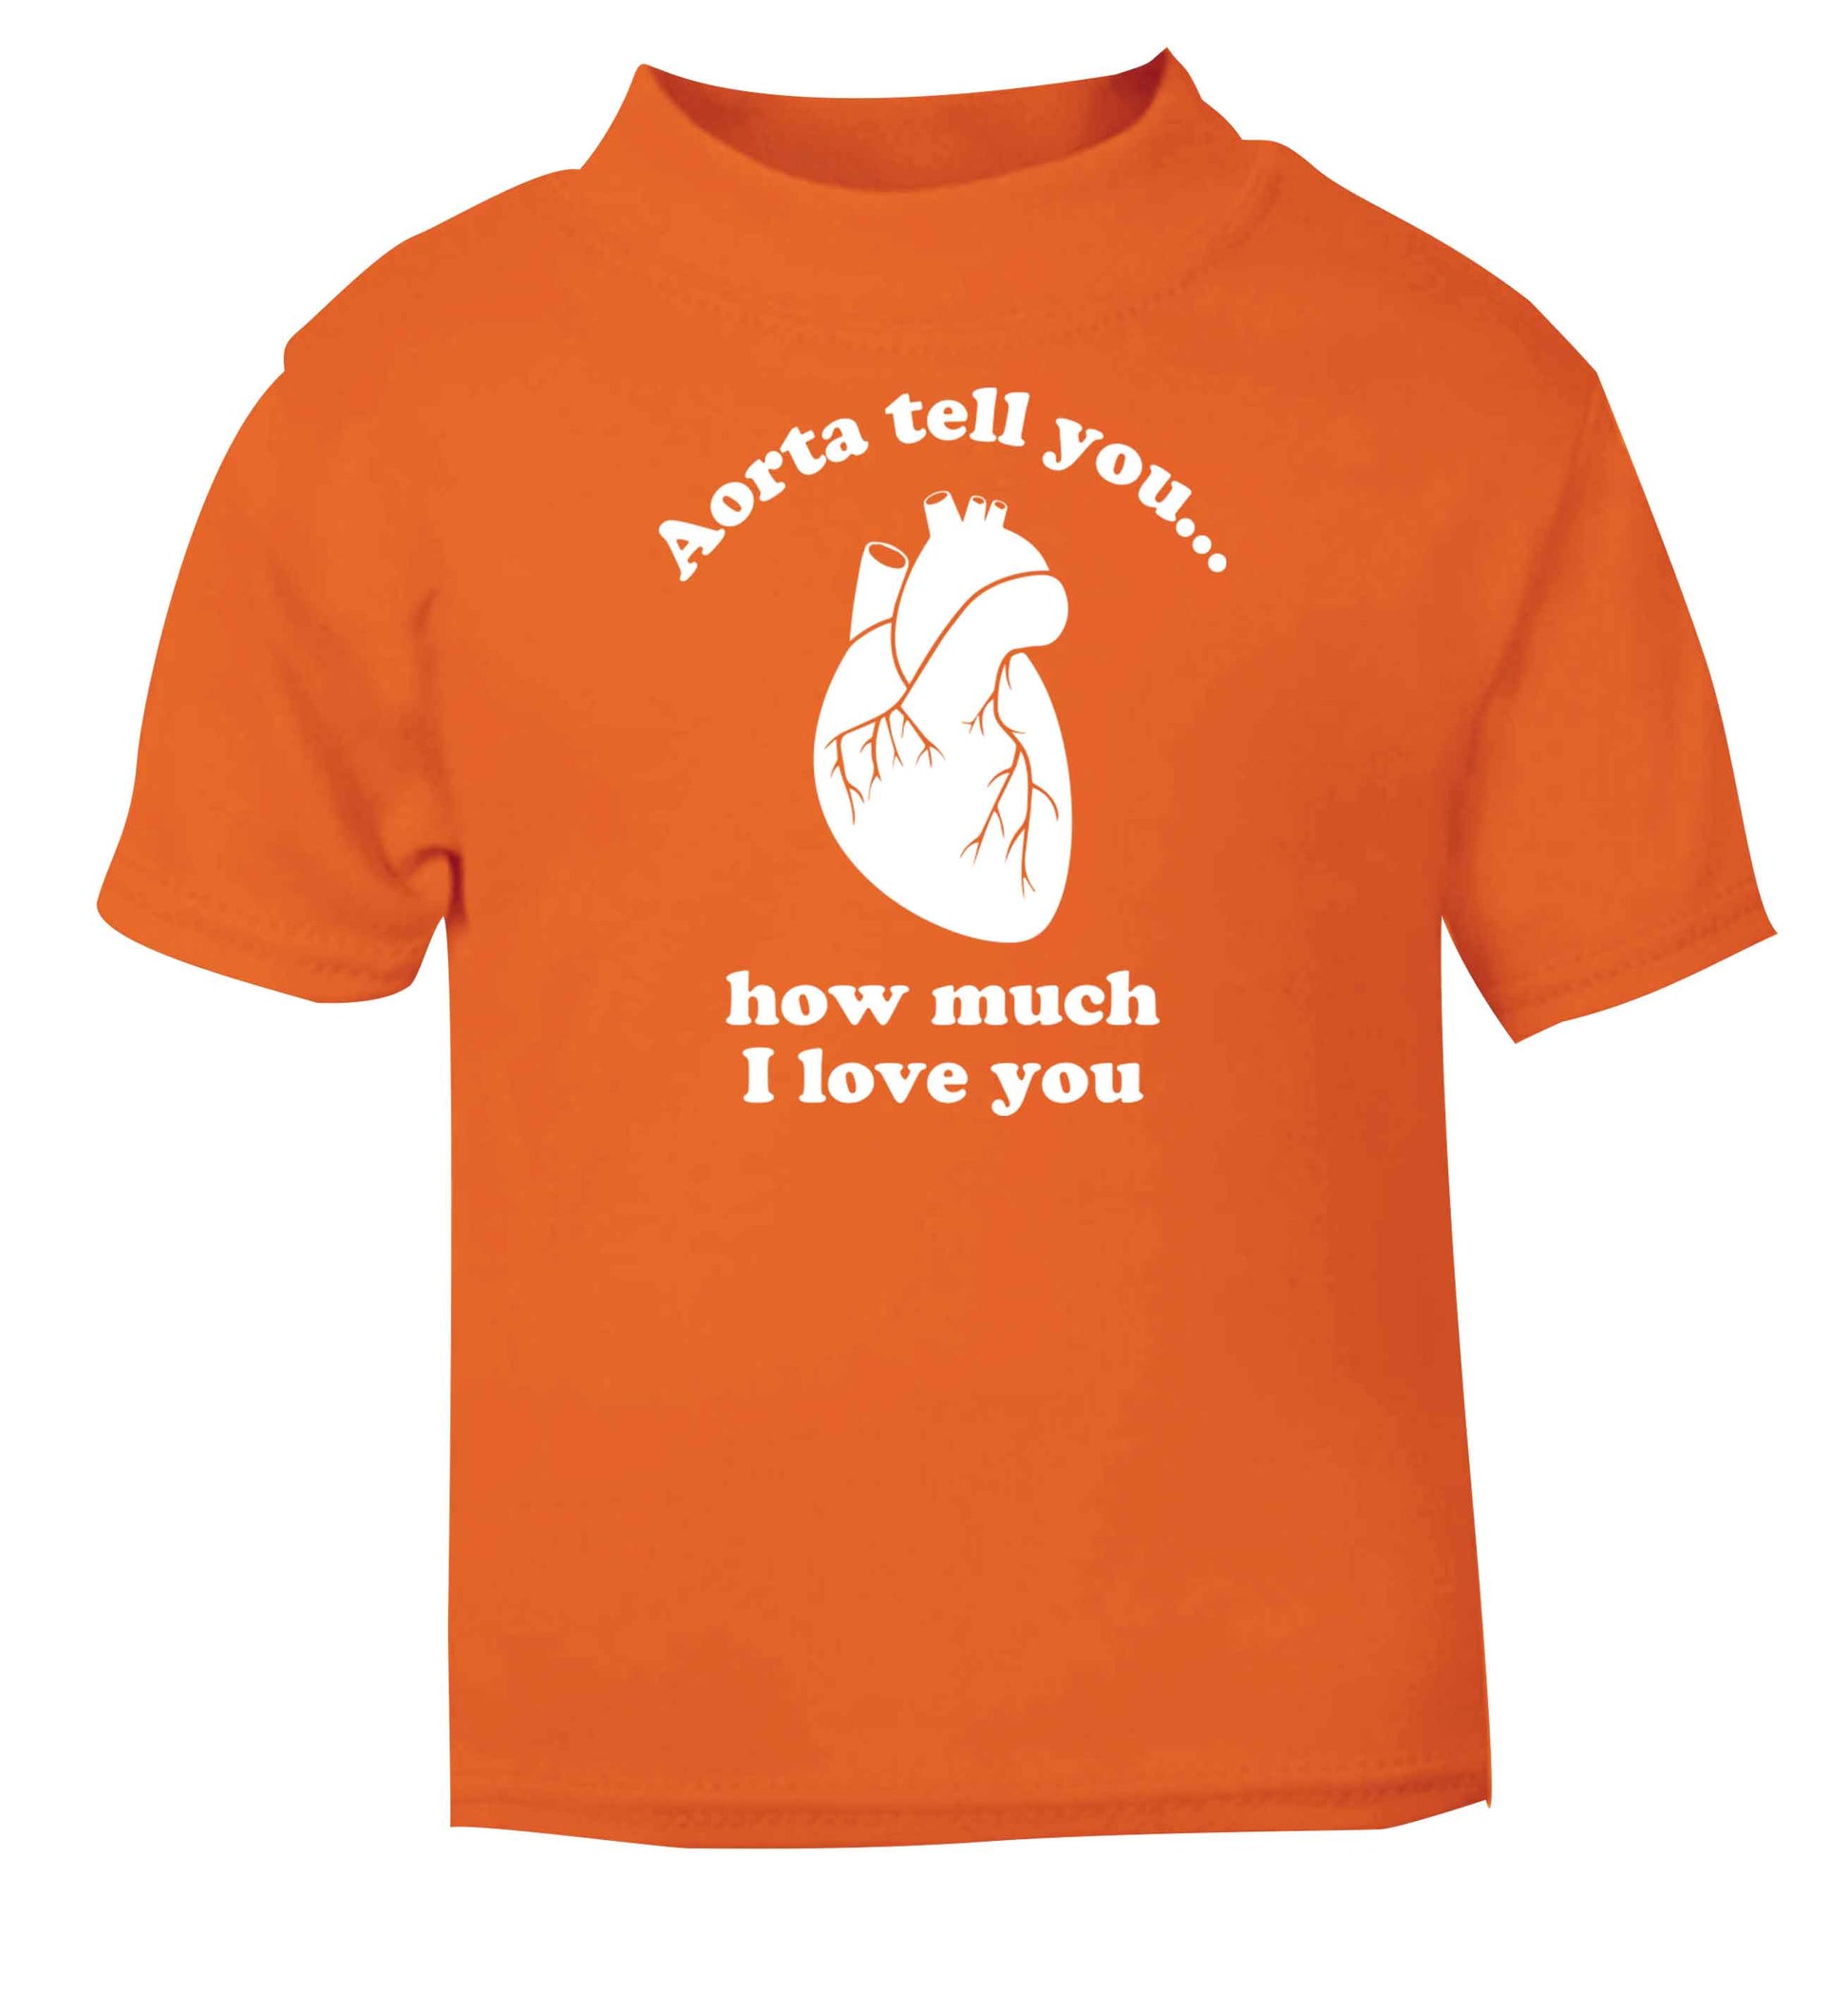 Aorta tell you how much I love you orange baby toddler Tshirt 2 Years